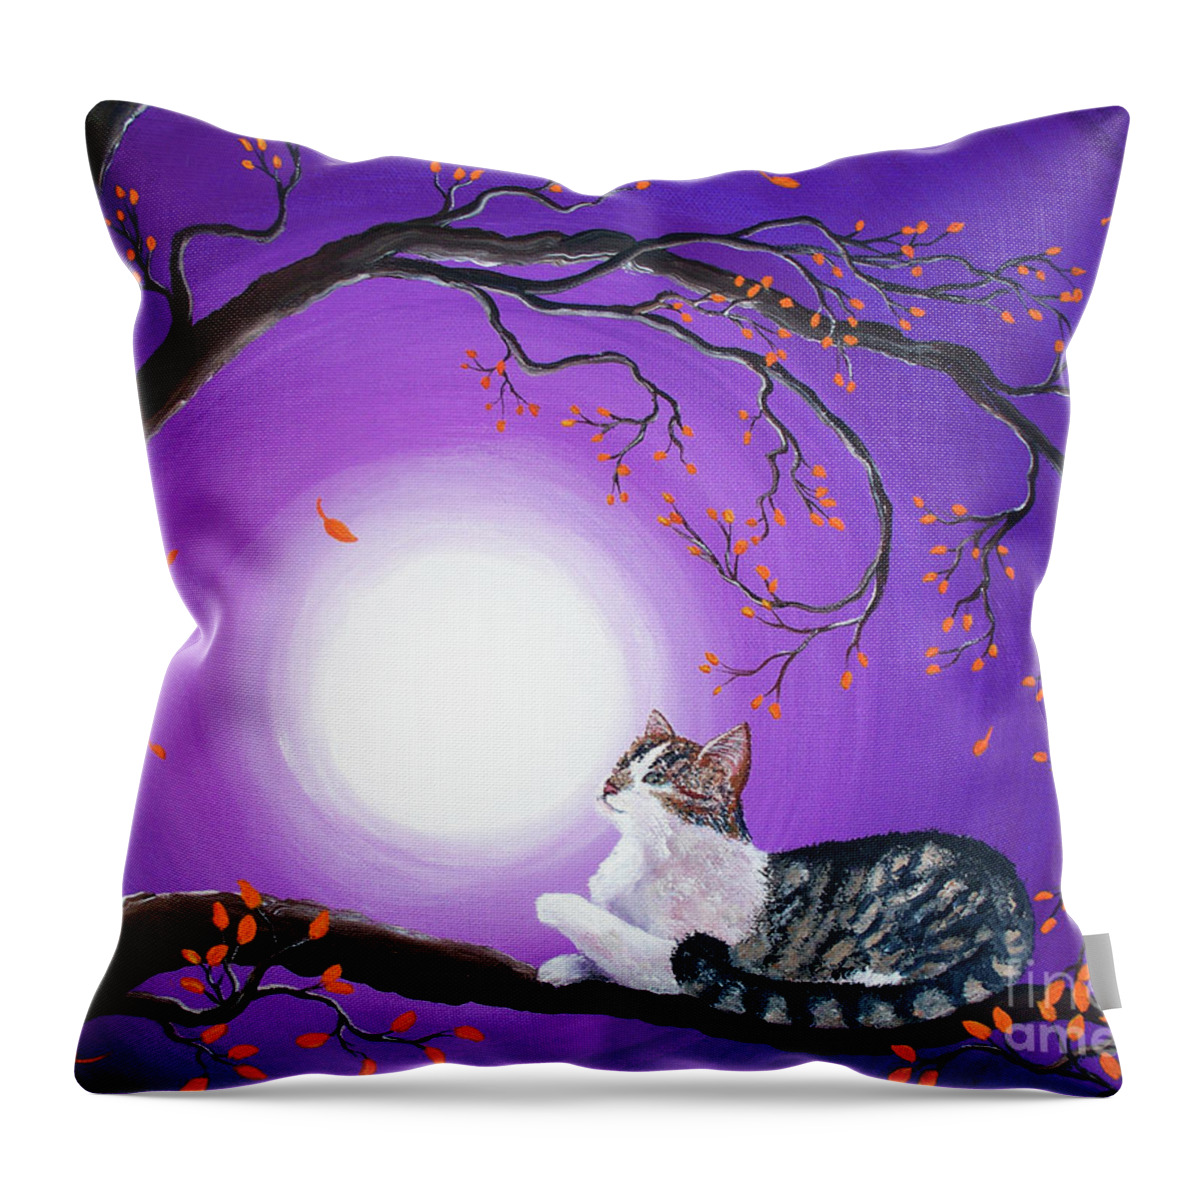 Original Throw Pillow featuring the painting Skye by Laura Iverson